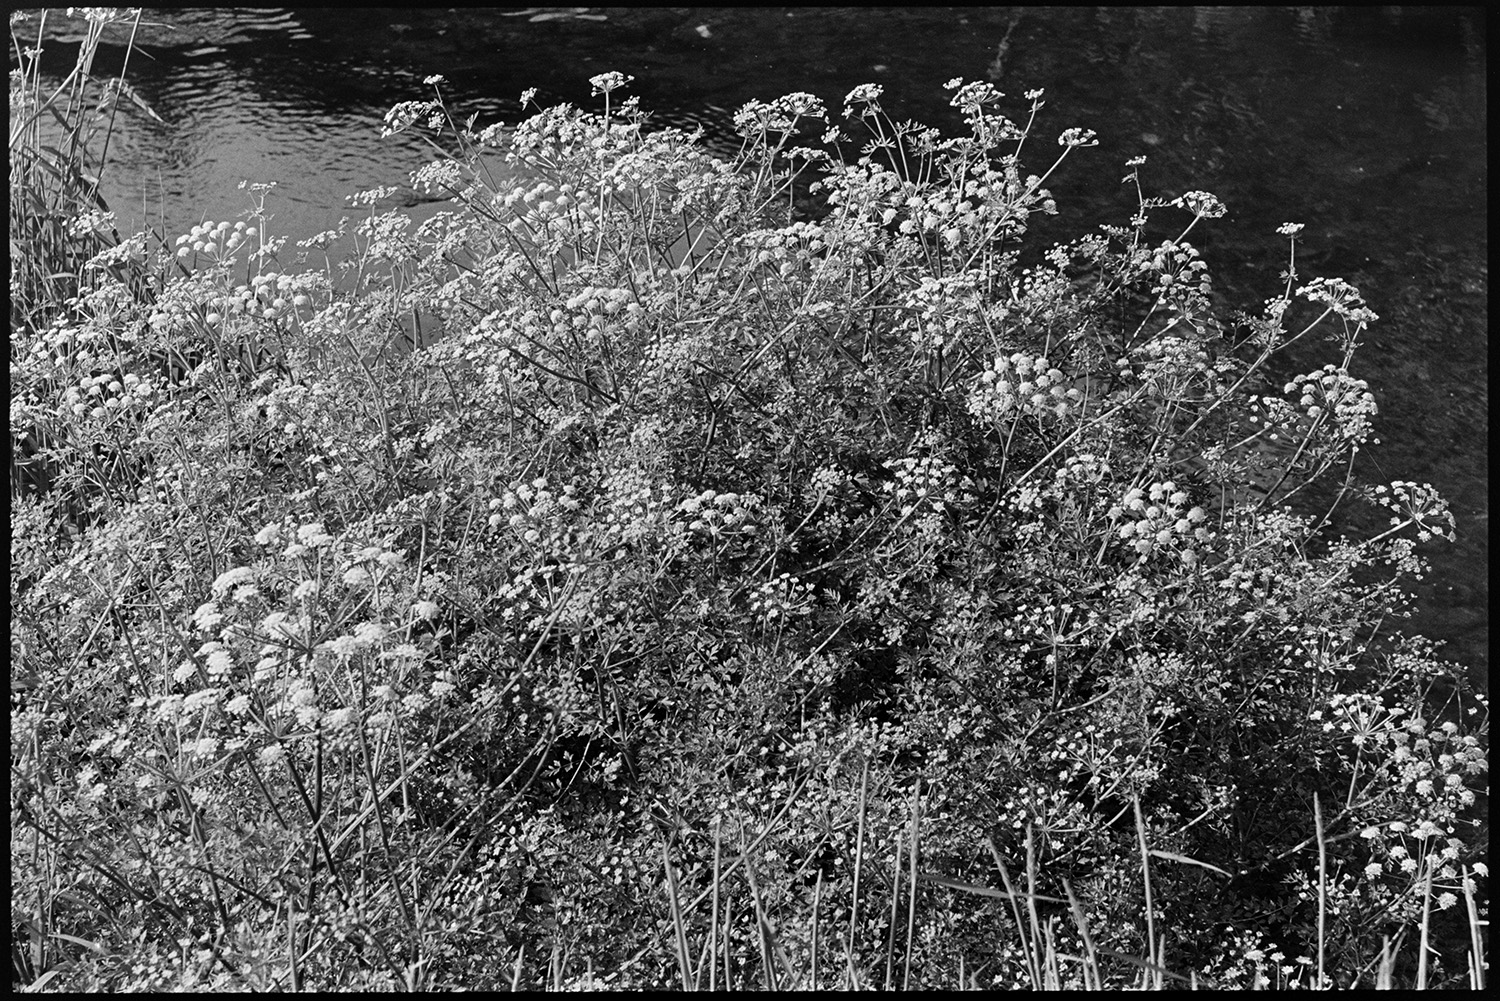 Stony river with plants. Trees growing overhead. Misty morning.
[Wild flowers growing on a bank of the River Taw at Eggesford.]